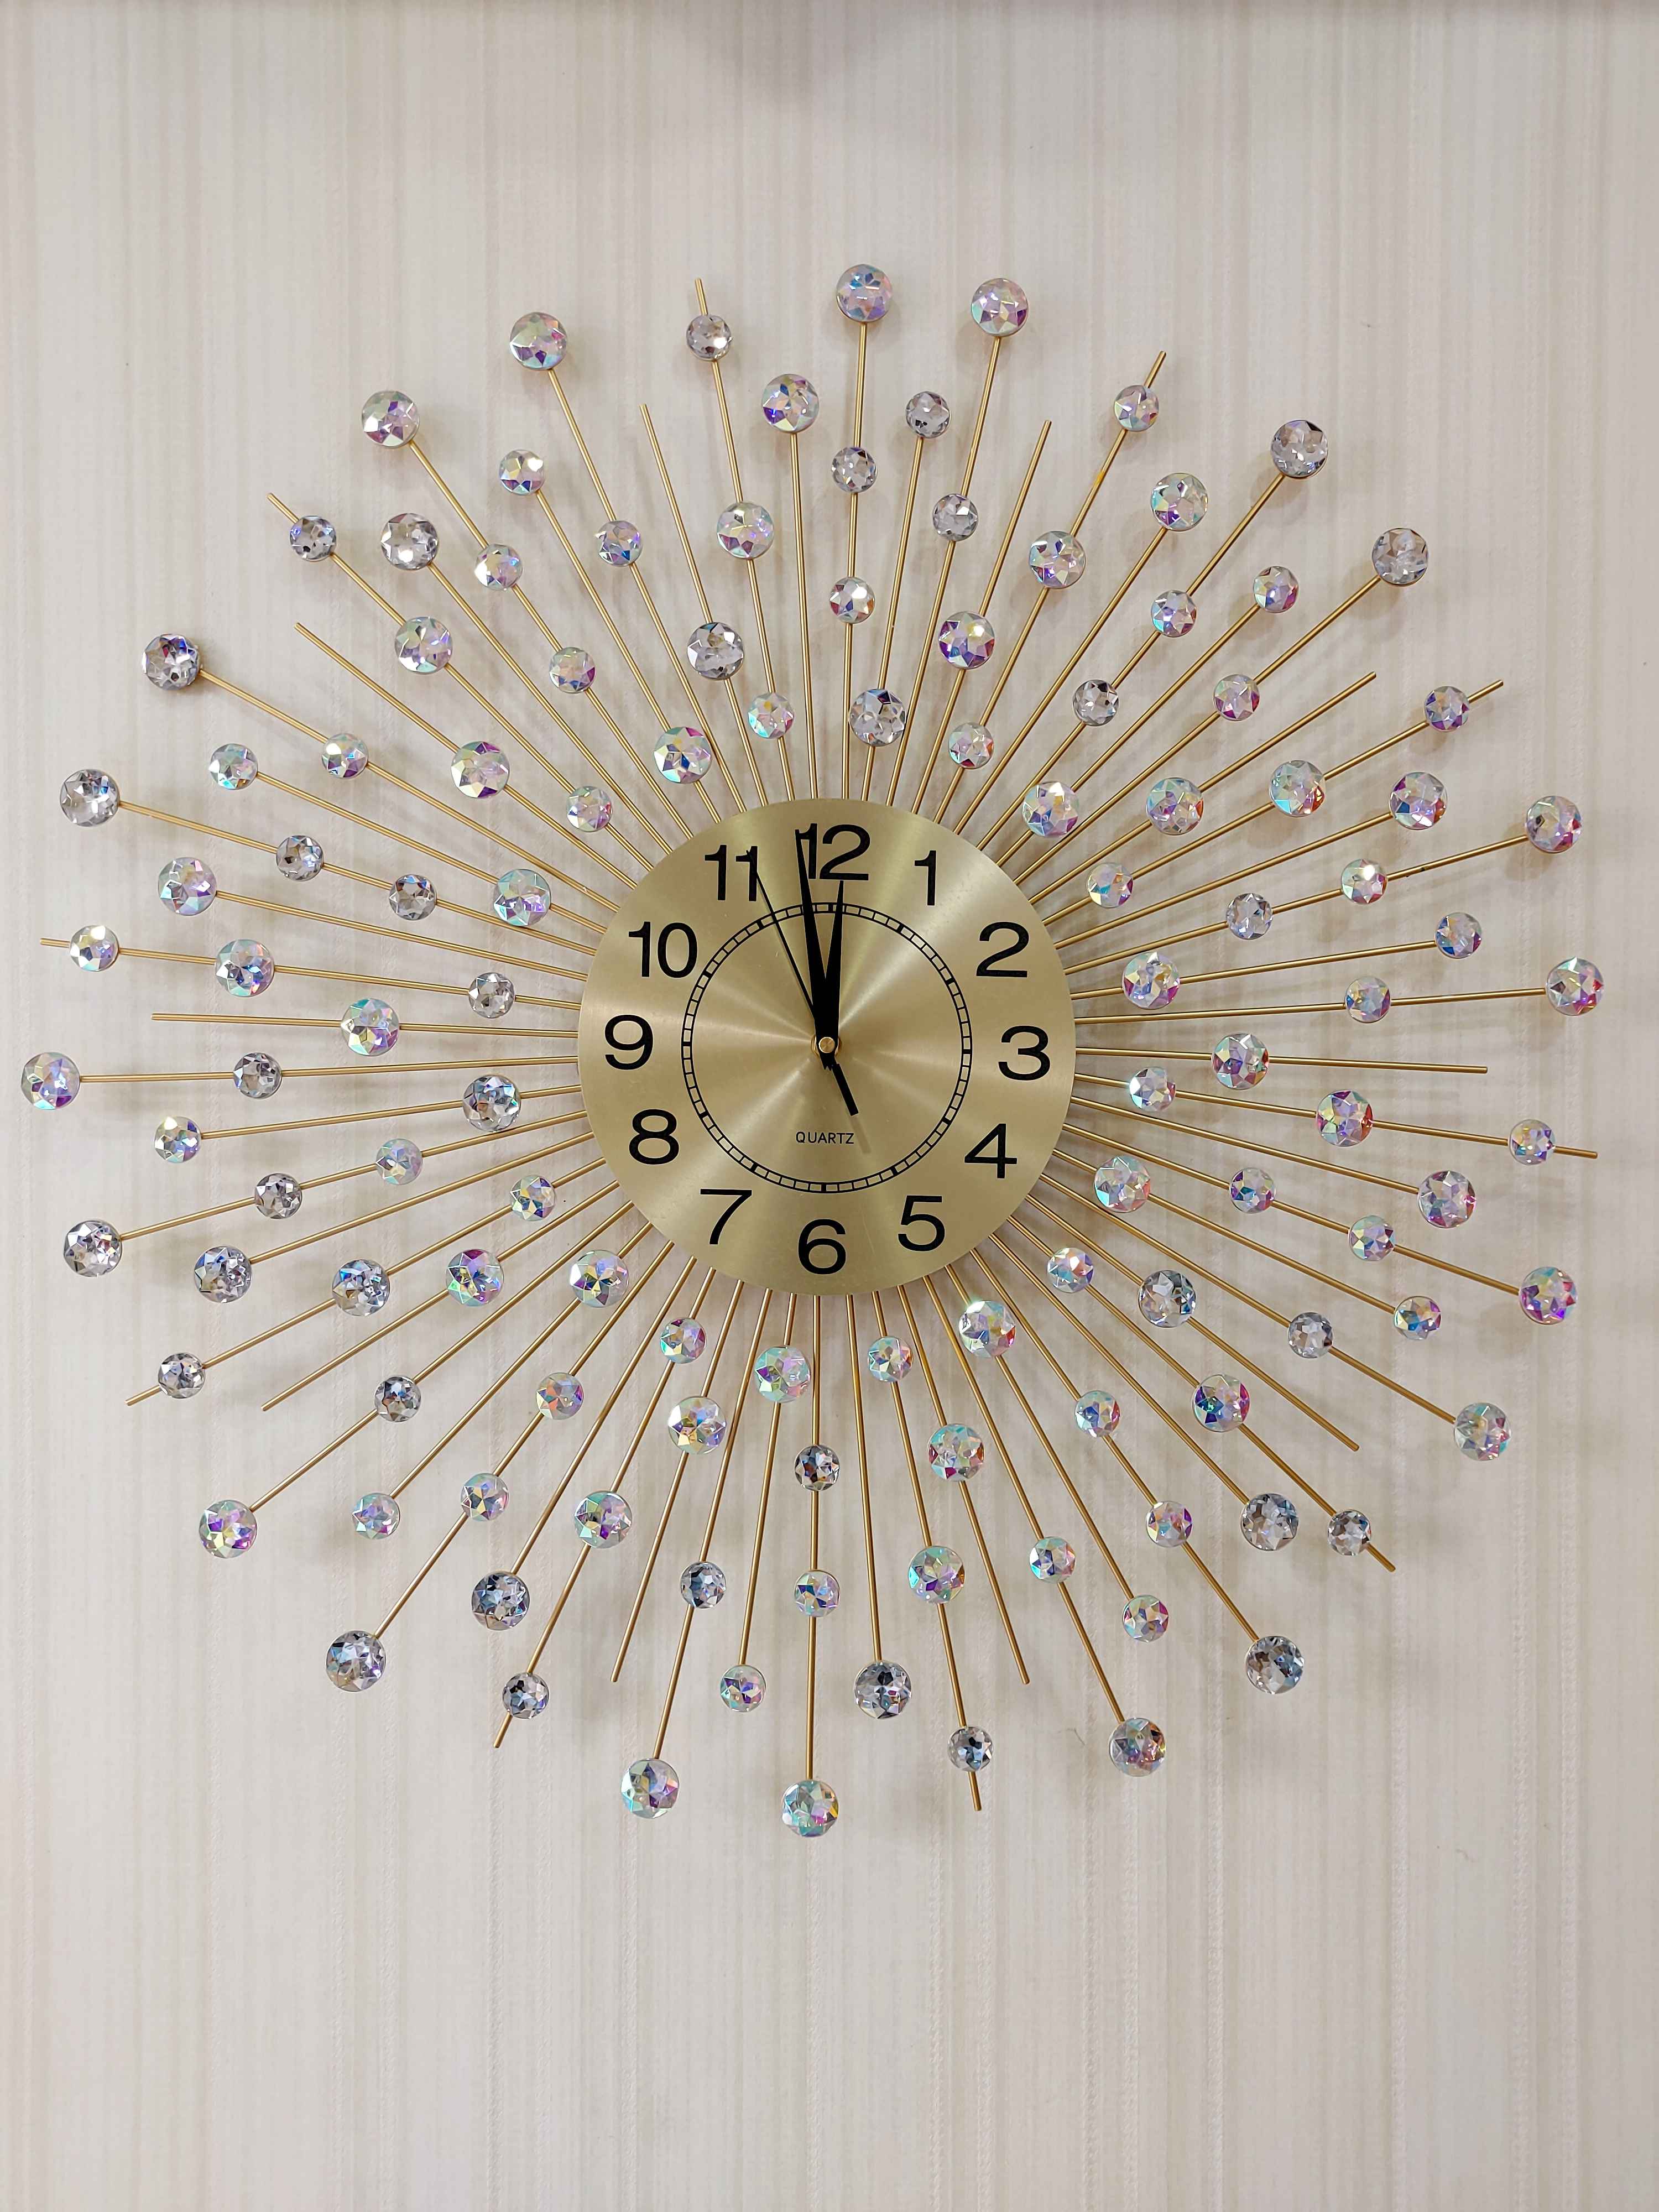 FunkyTradition 3D Golden Sun Shaped Diamond Studded Wall Clock, Wall Watch, Wall Decor for Home Office Decor and Gifts 62 CM Tall